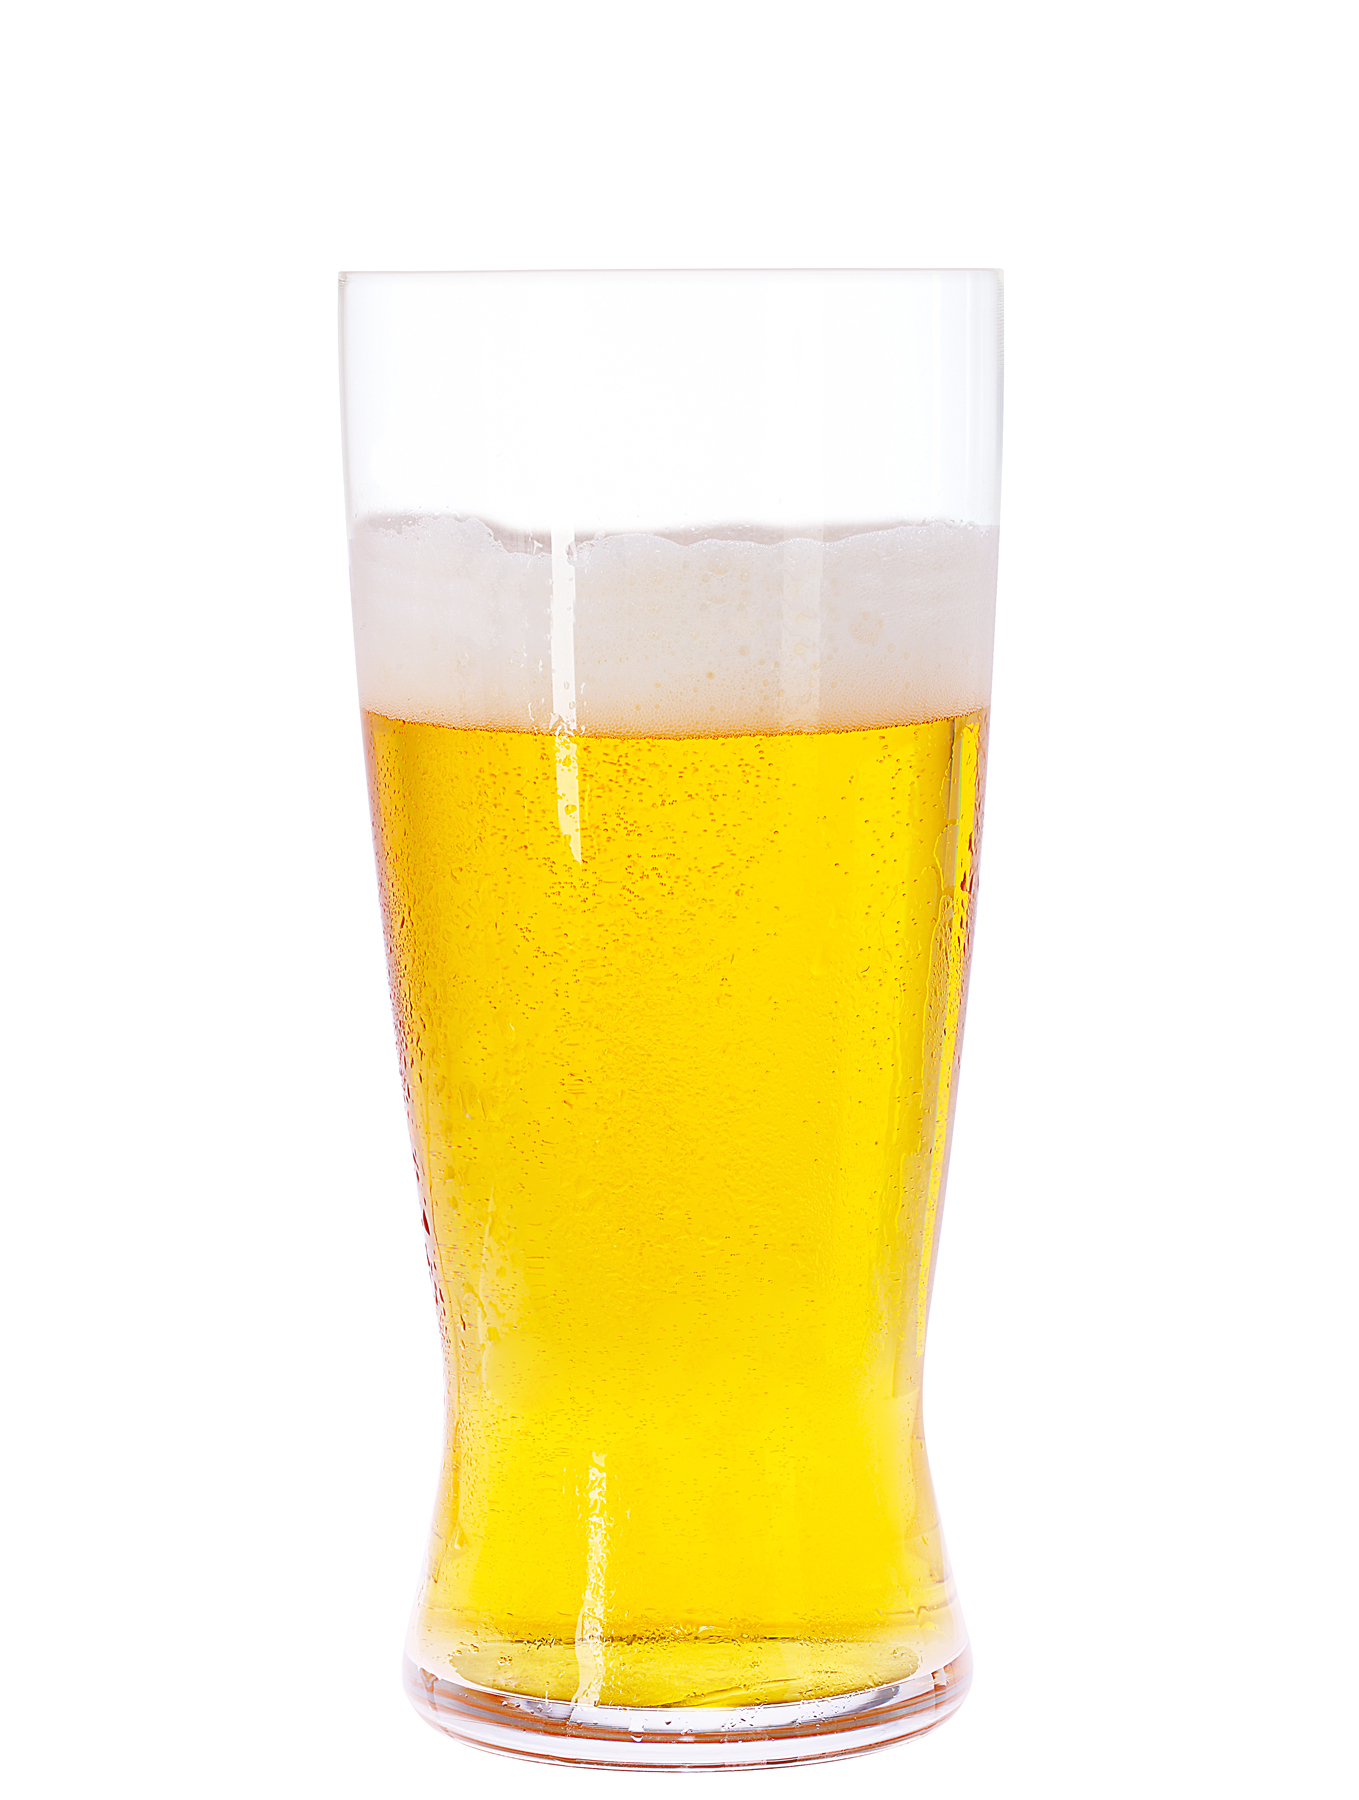 Lager glass Beer Classics, Spiegelau - 630ml (1 pc.)